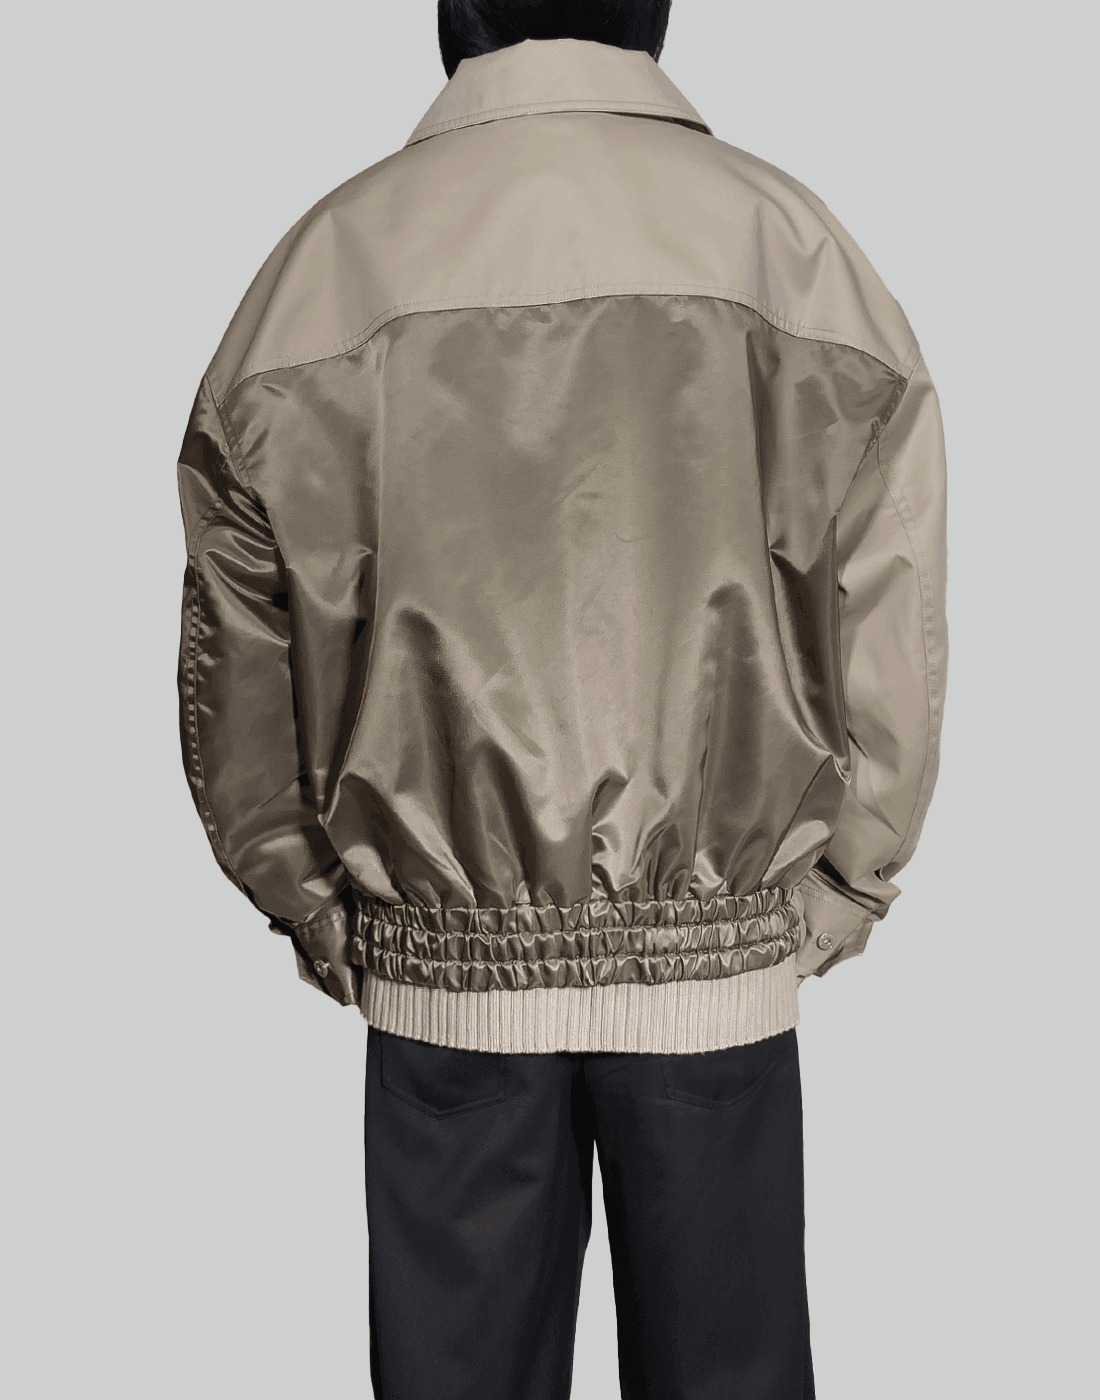 FENG CHEN WANG DOUBLE PANELLED JACKET - 082plus